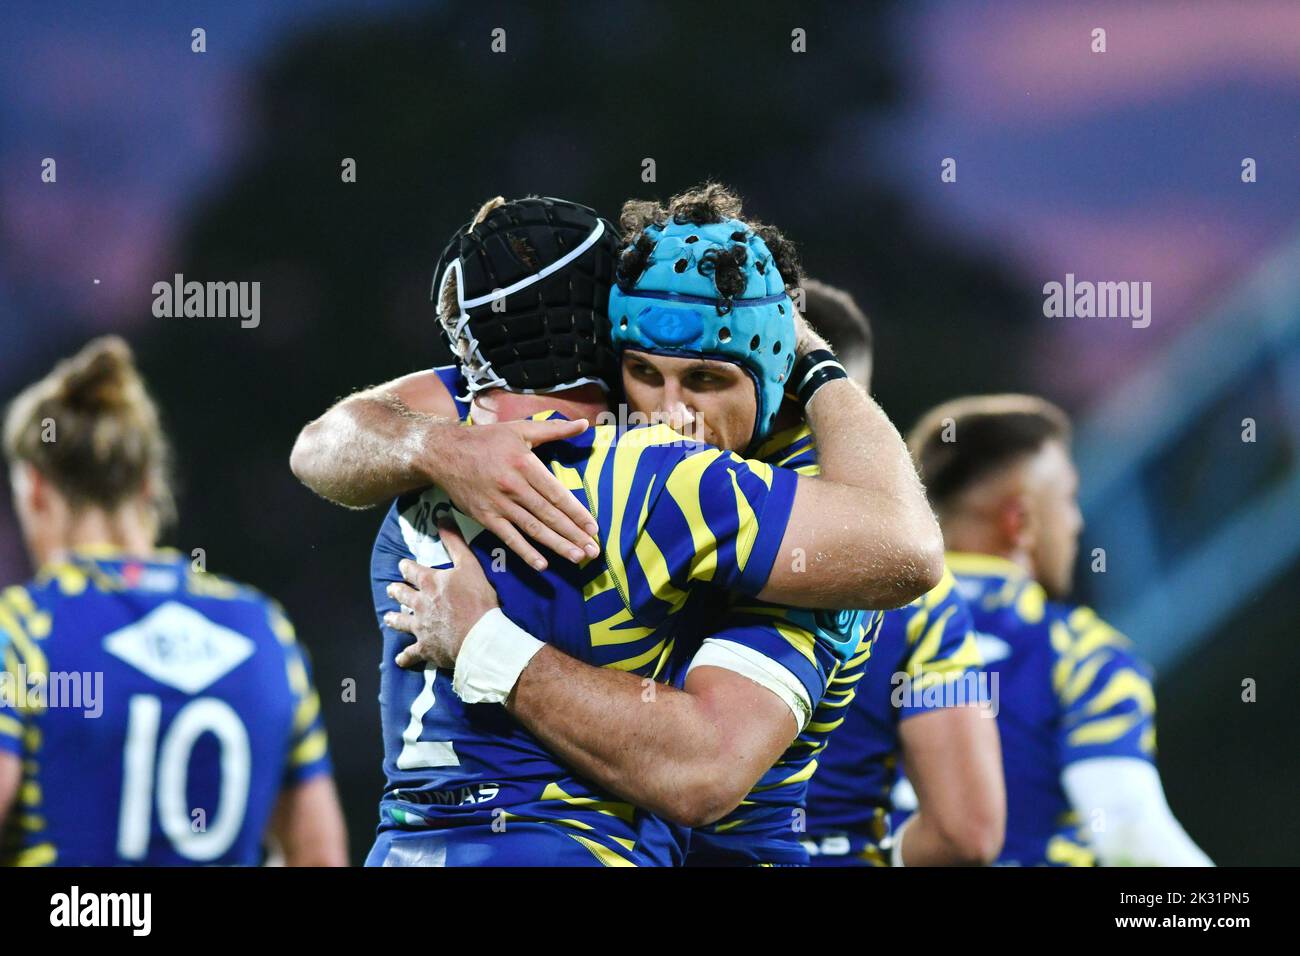 Sergio Lanfranchi stadium, Parma, Italy, September 23, 2022, an hug between Luca Bigi and Luca Andreani (Zbre)  during  Zebre Rugby vs Sharks - United Stock Photo